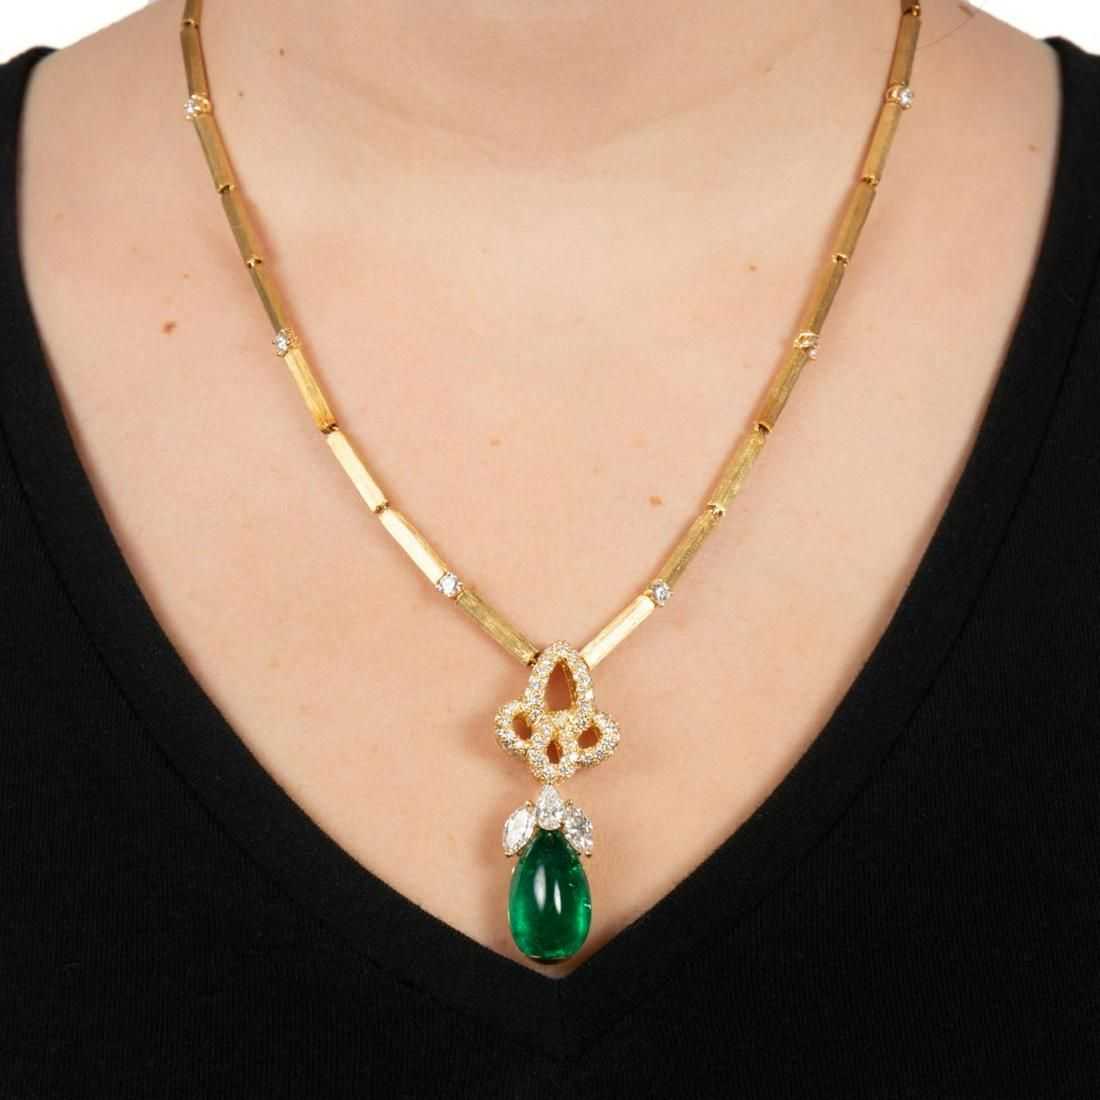 A Henry Dunay emerald and diamond necklace in 18K gold attained $27,500 plus the buyer’s premium in November 2022. Image courtesy of Ahlers & Ogletree Auction Gallery and LiveAuctioneers.